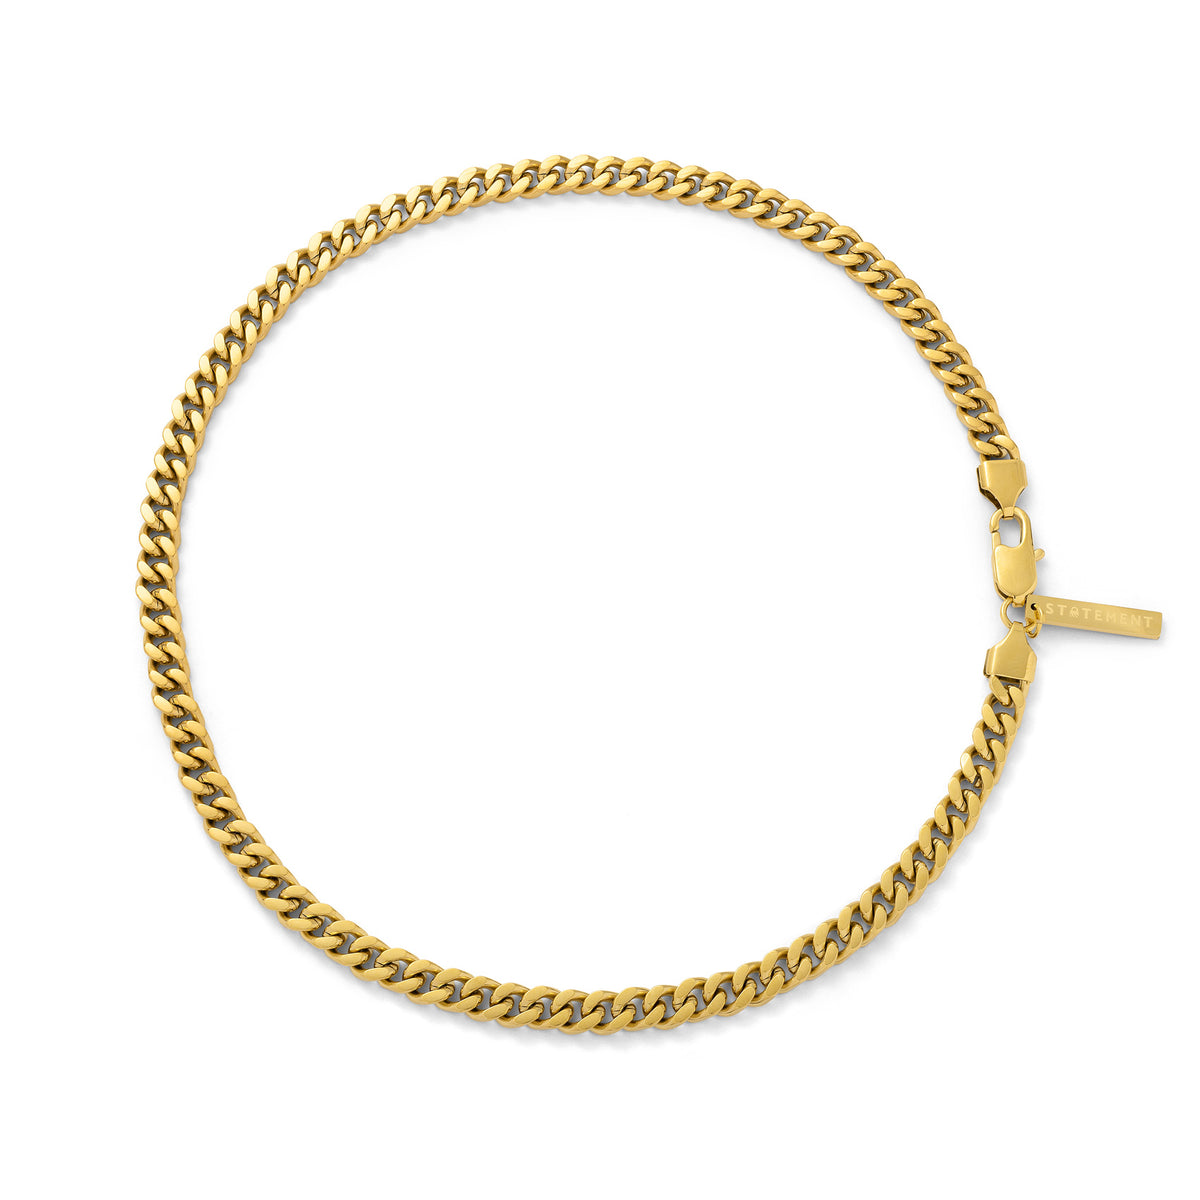 Gold Cuban Link Necklace on white background